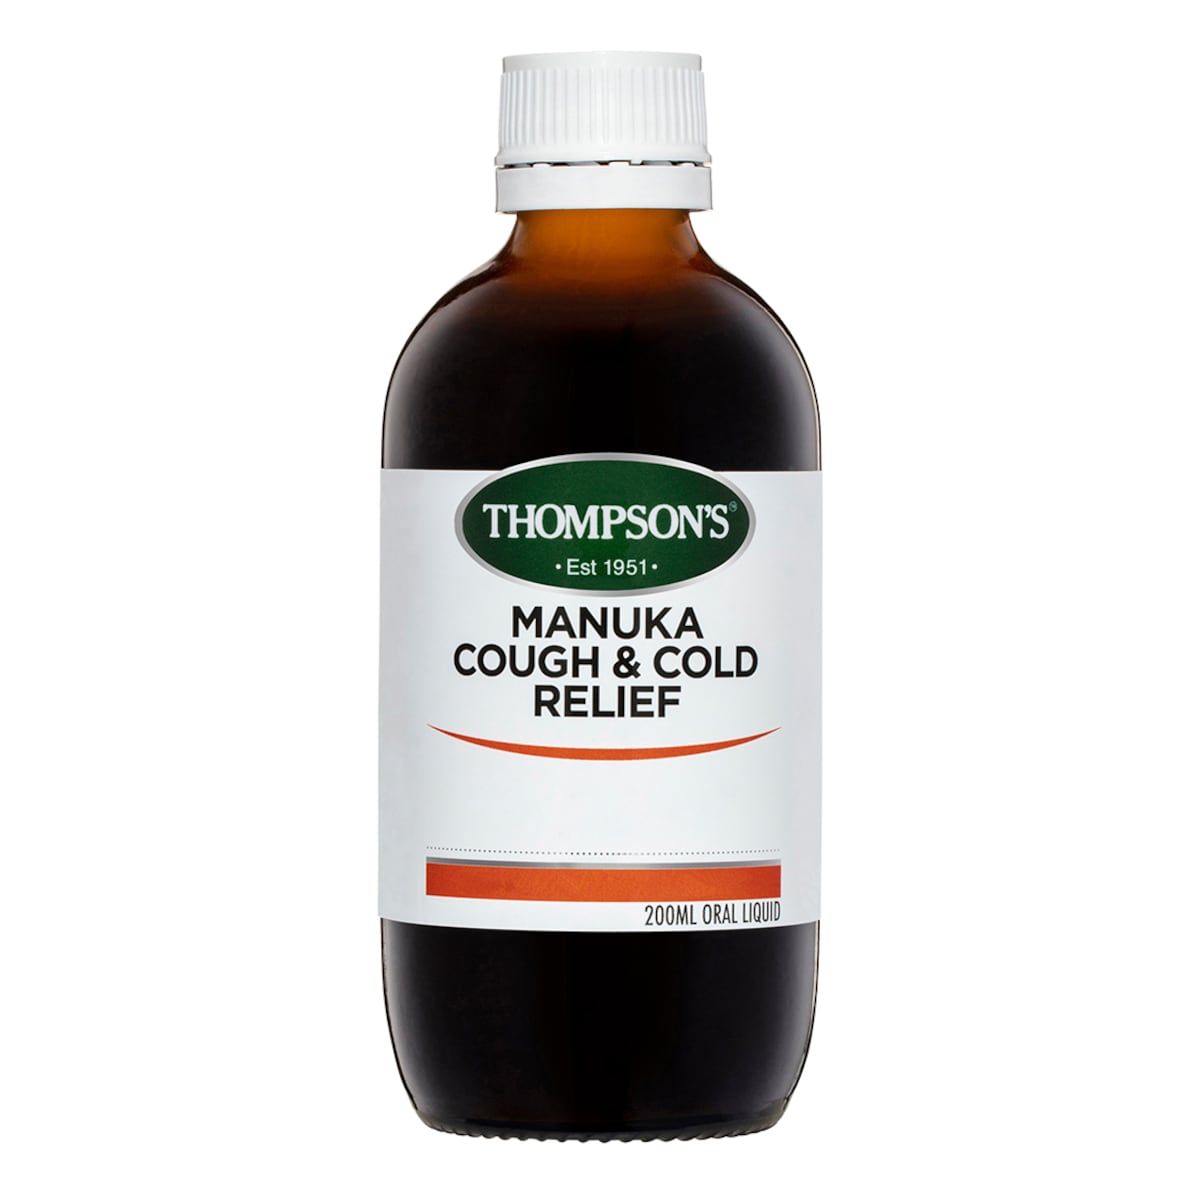 Thompsons Manuka Cough & Cold Relief 200ml